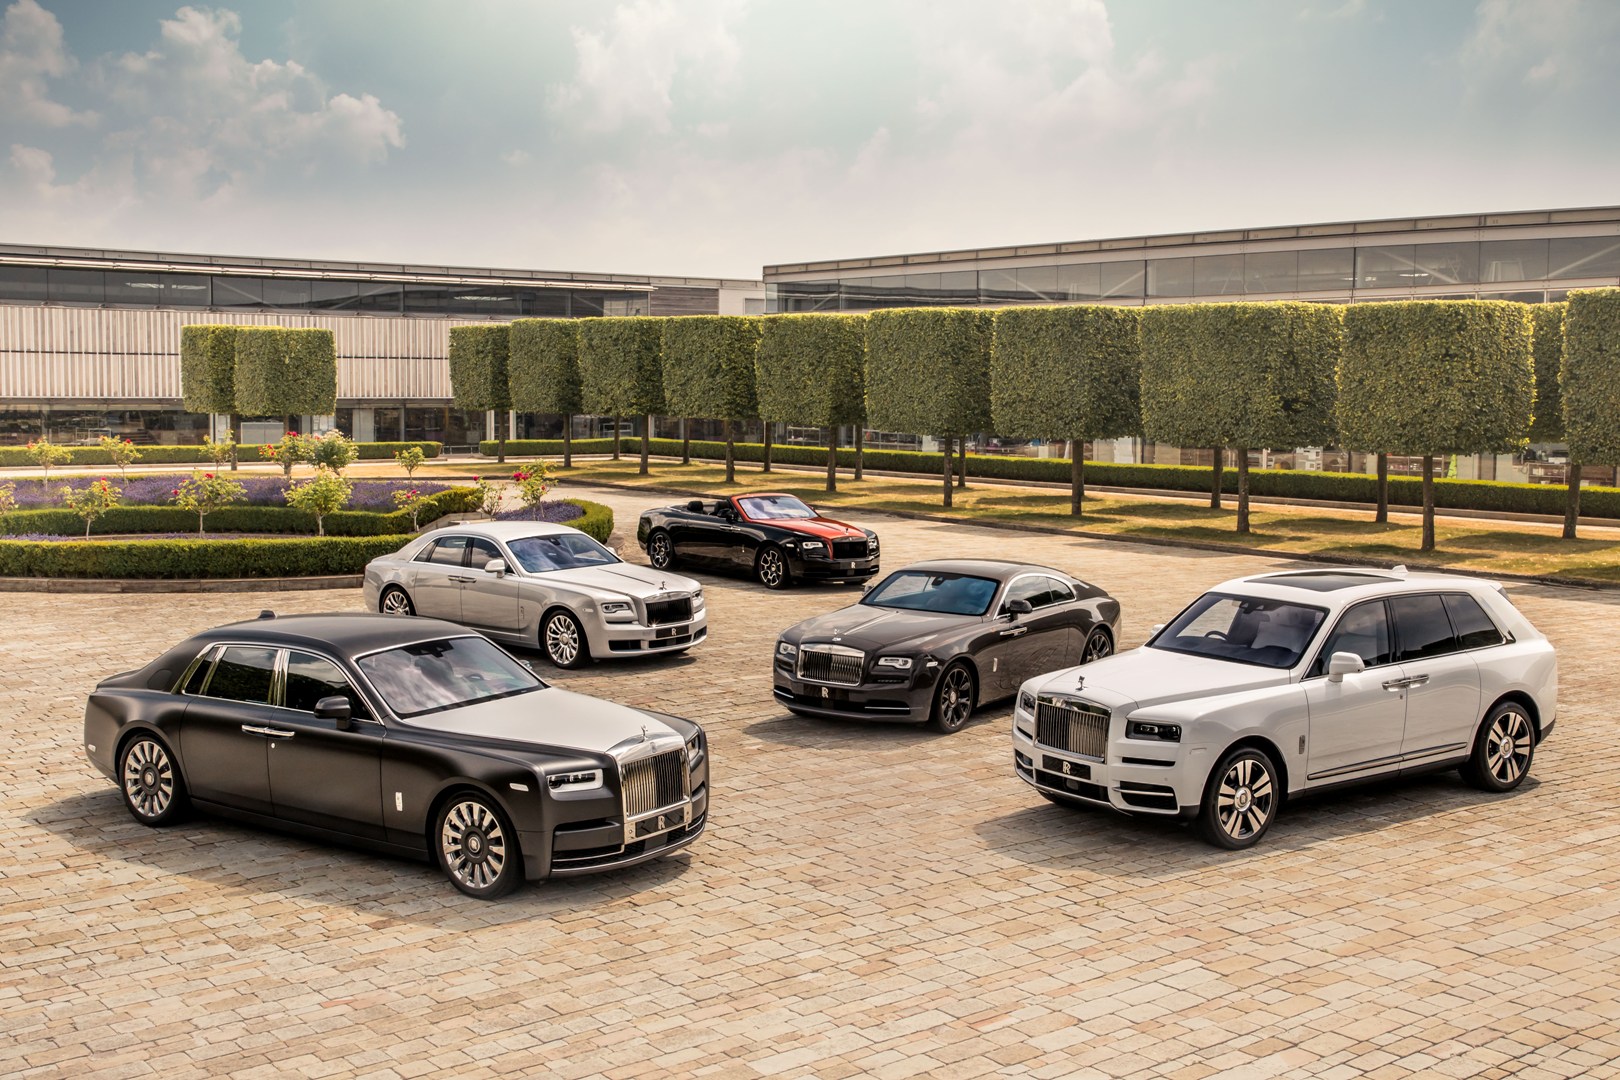 Rolls-Royce Motor Cars Issues Clarification in Relation to Its Assumed or Implied Connection to Rolls-Royce Plc